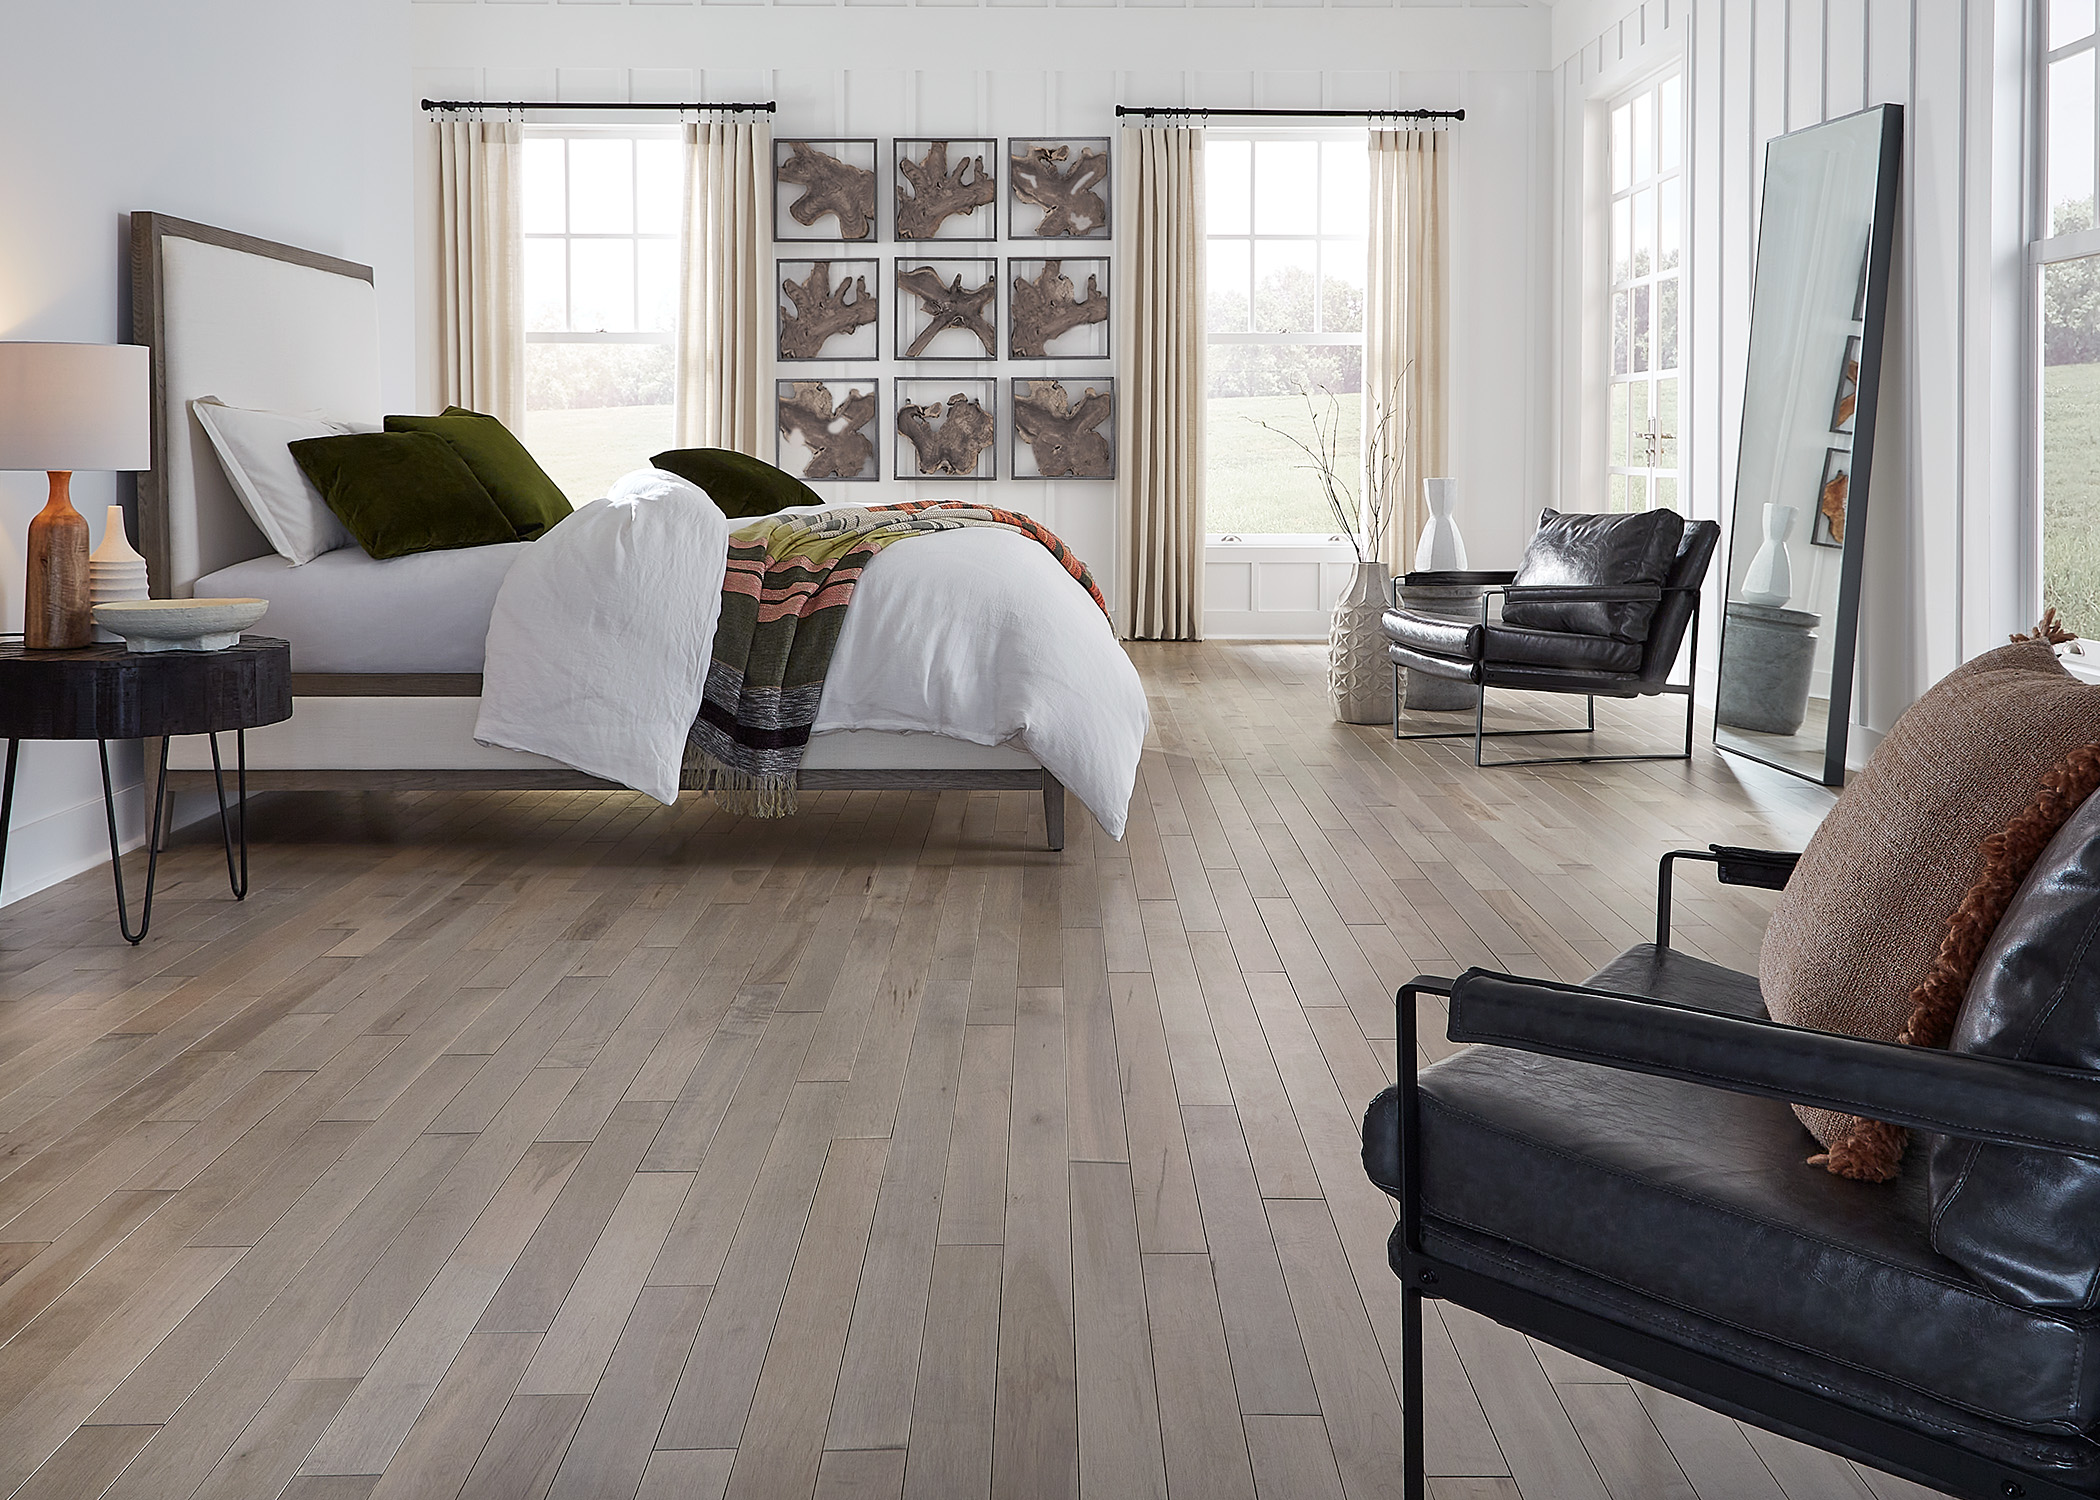 medium brown solid hardwood floor in bedroom with white bedding and dark brown leather chairs